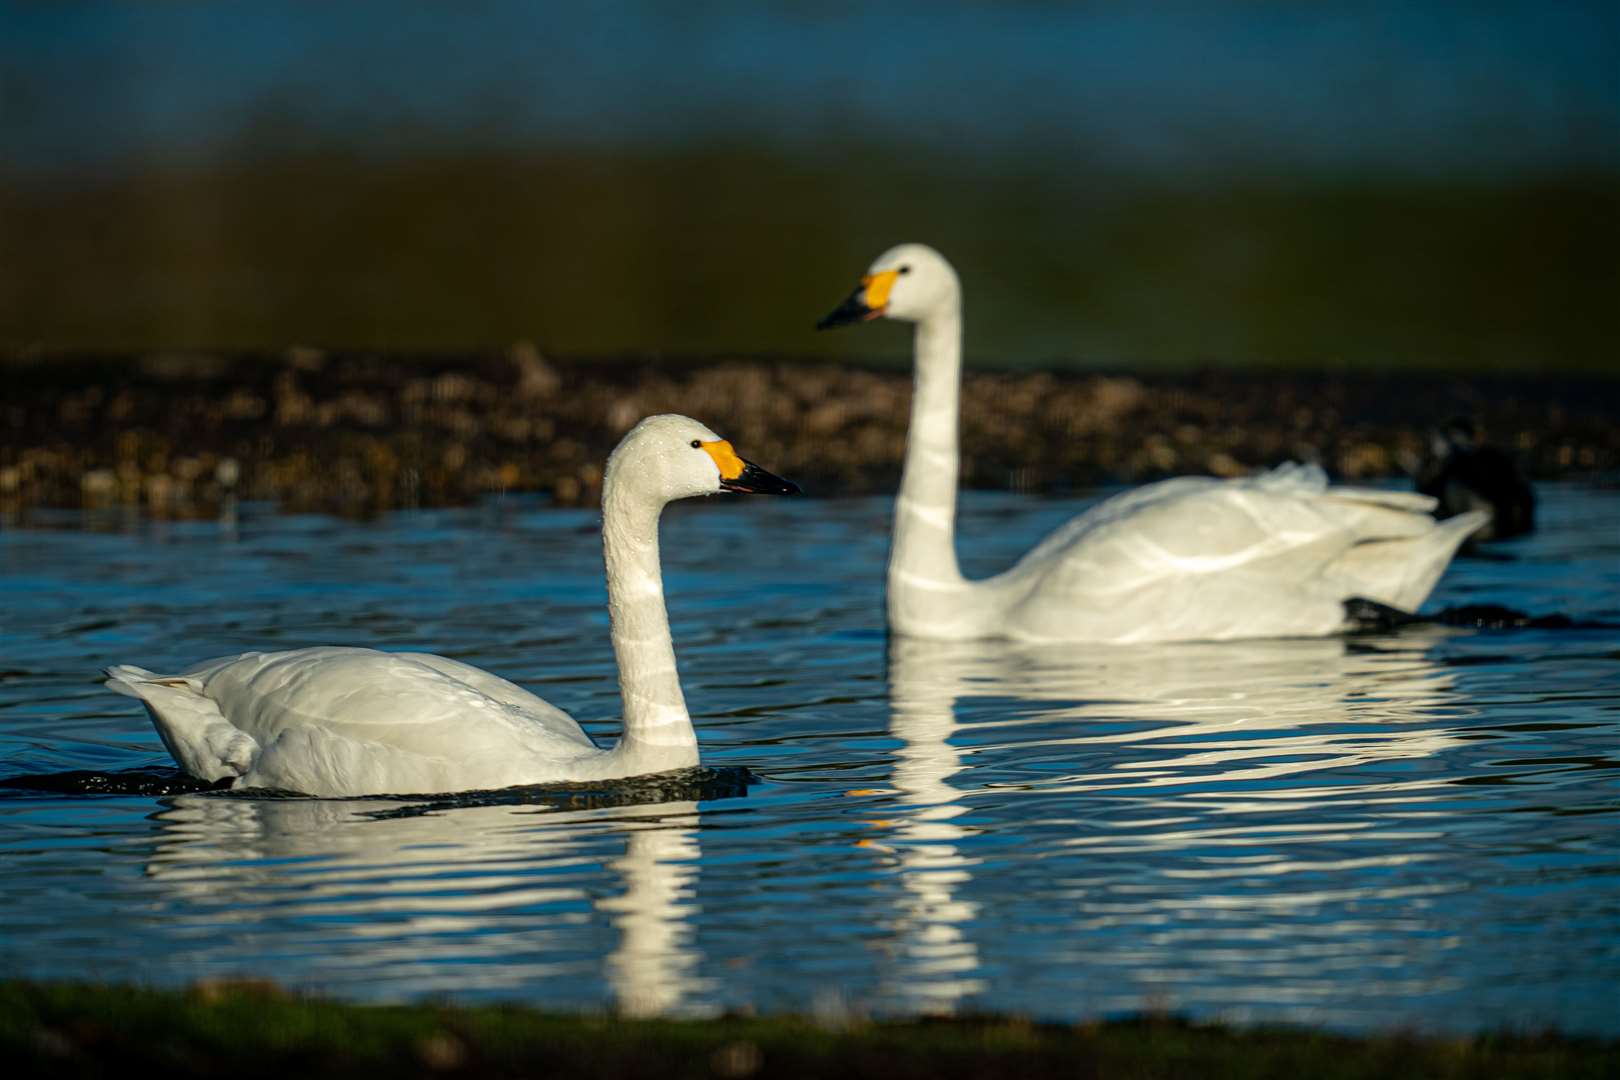 Bewick’s swans arrive at Slimbridge Wetland Centre in Gloucestershire after a 2,175-mile migration flight across Europe from nesting spots in Siberia (Ben Birchall/PA)